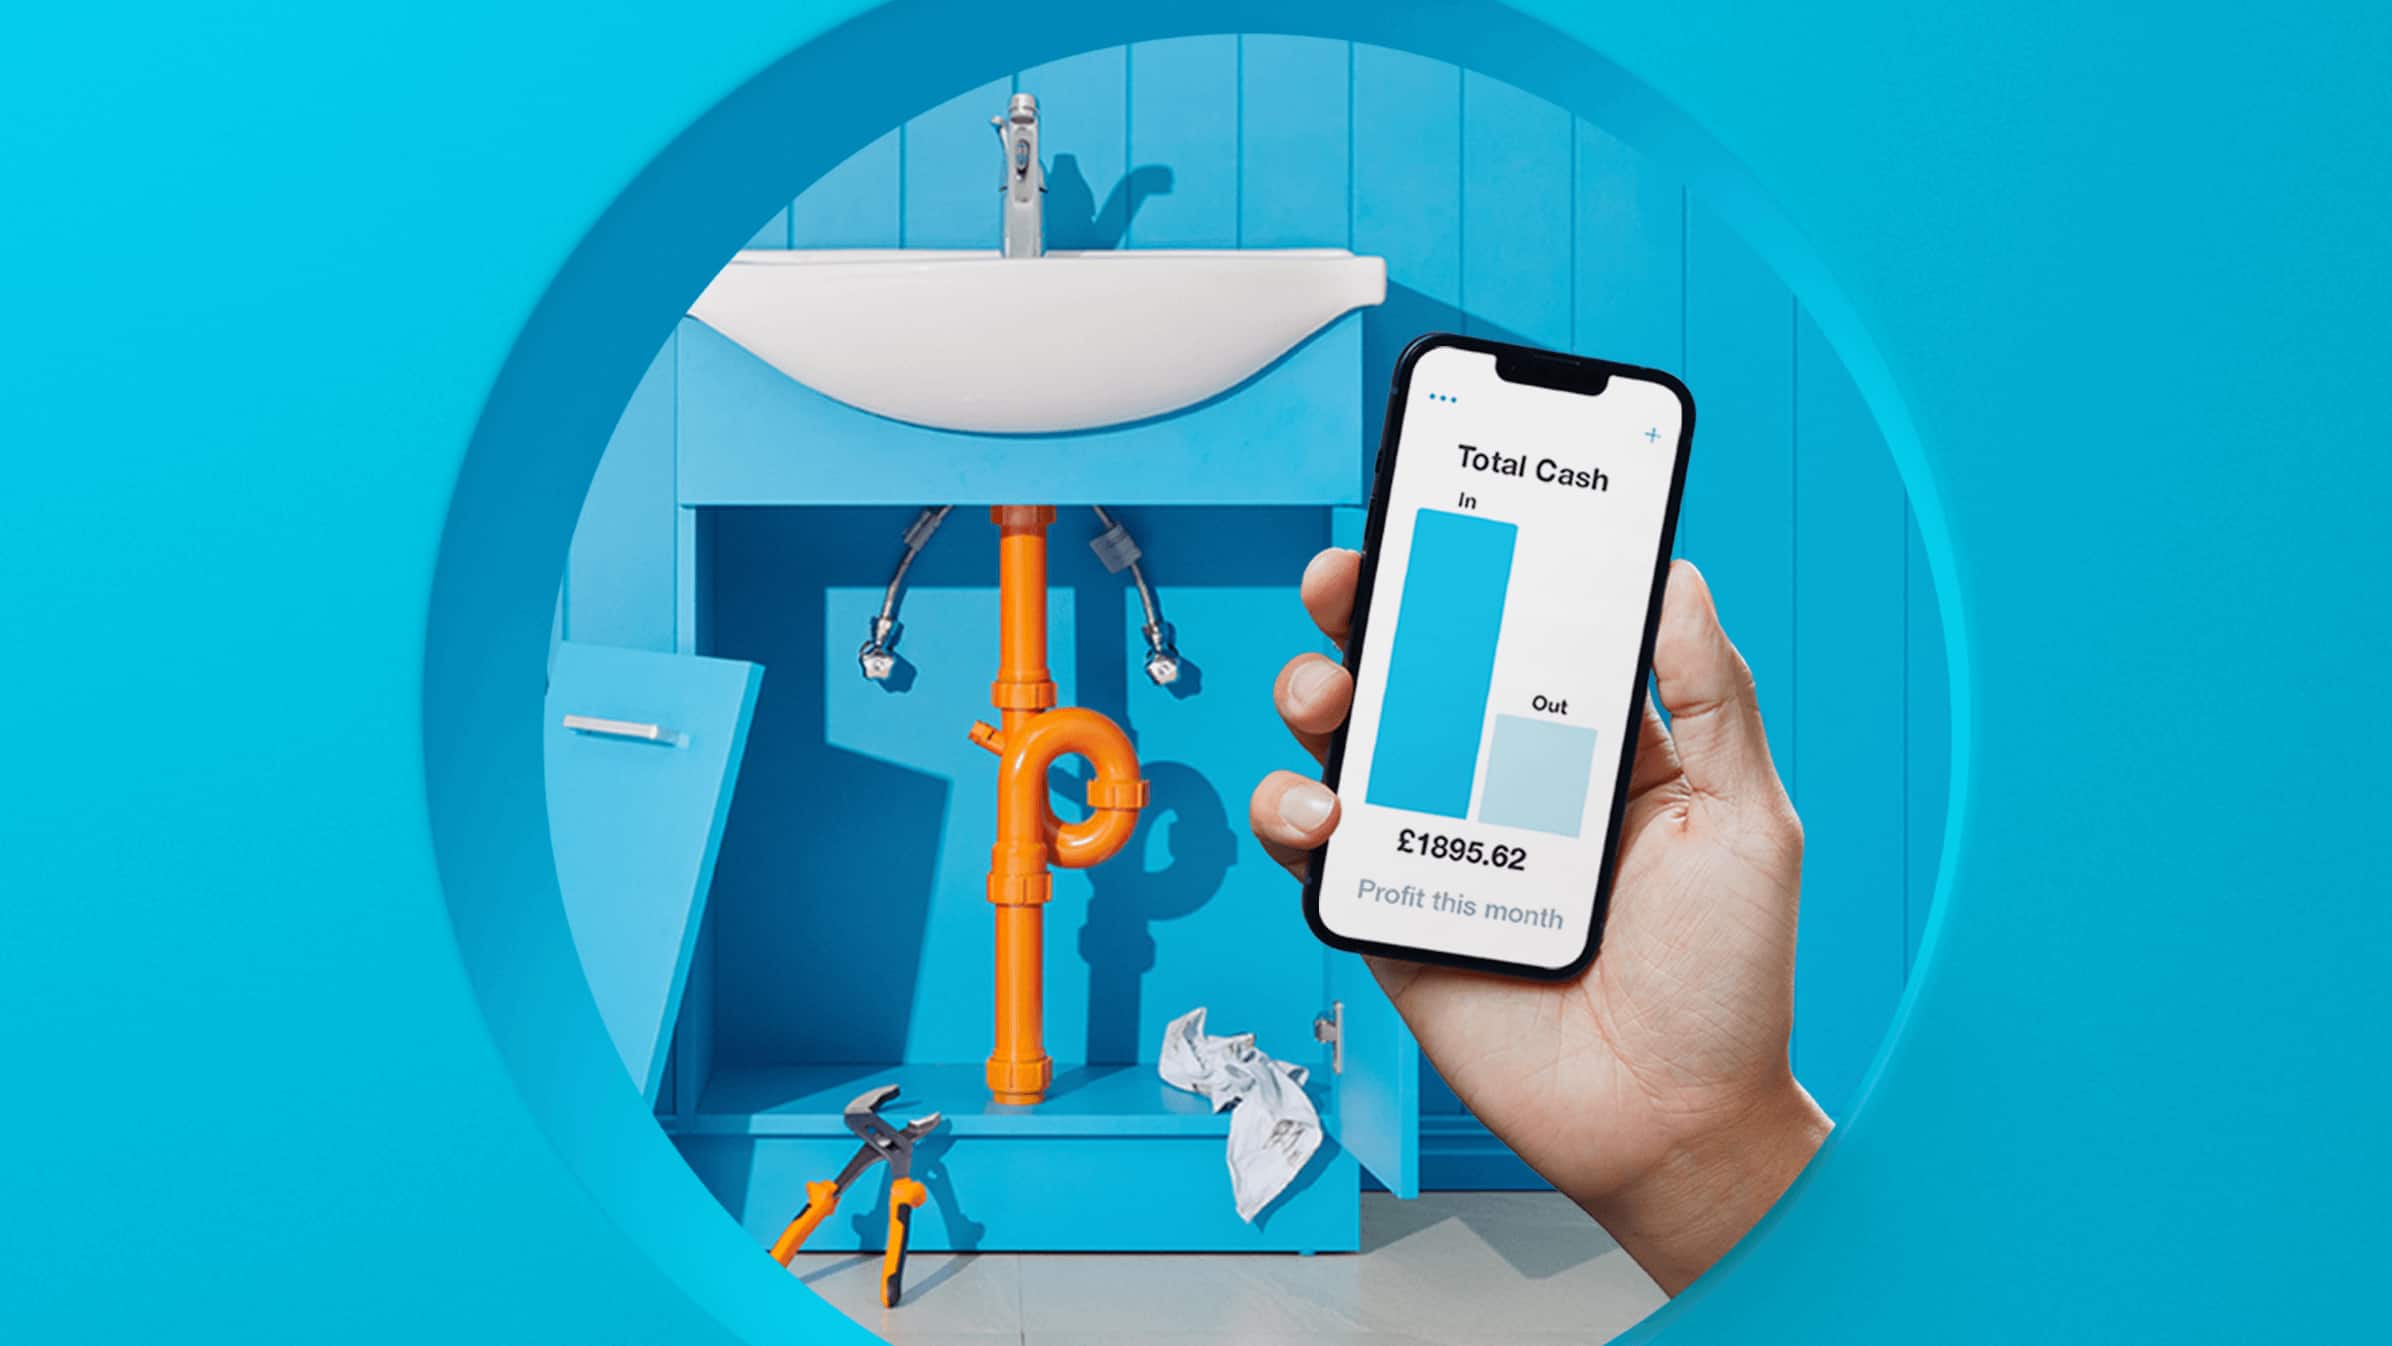 Xero blue sink with orange water pipes. Hand in front holding a phone device with cashflow dashboard.